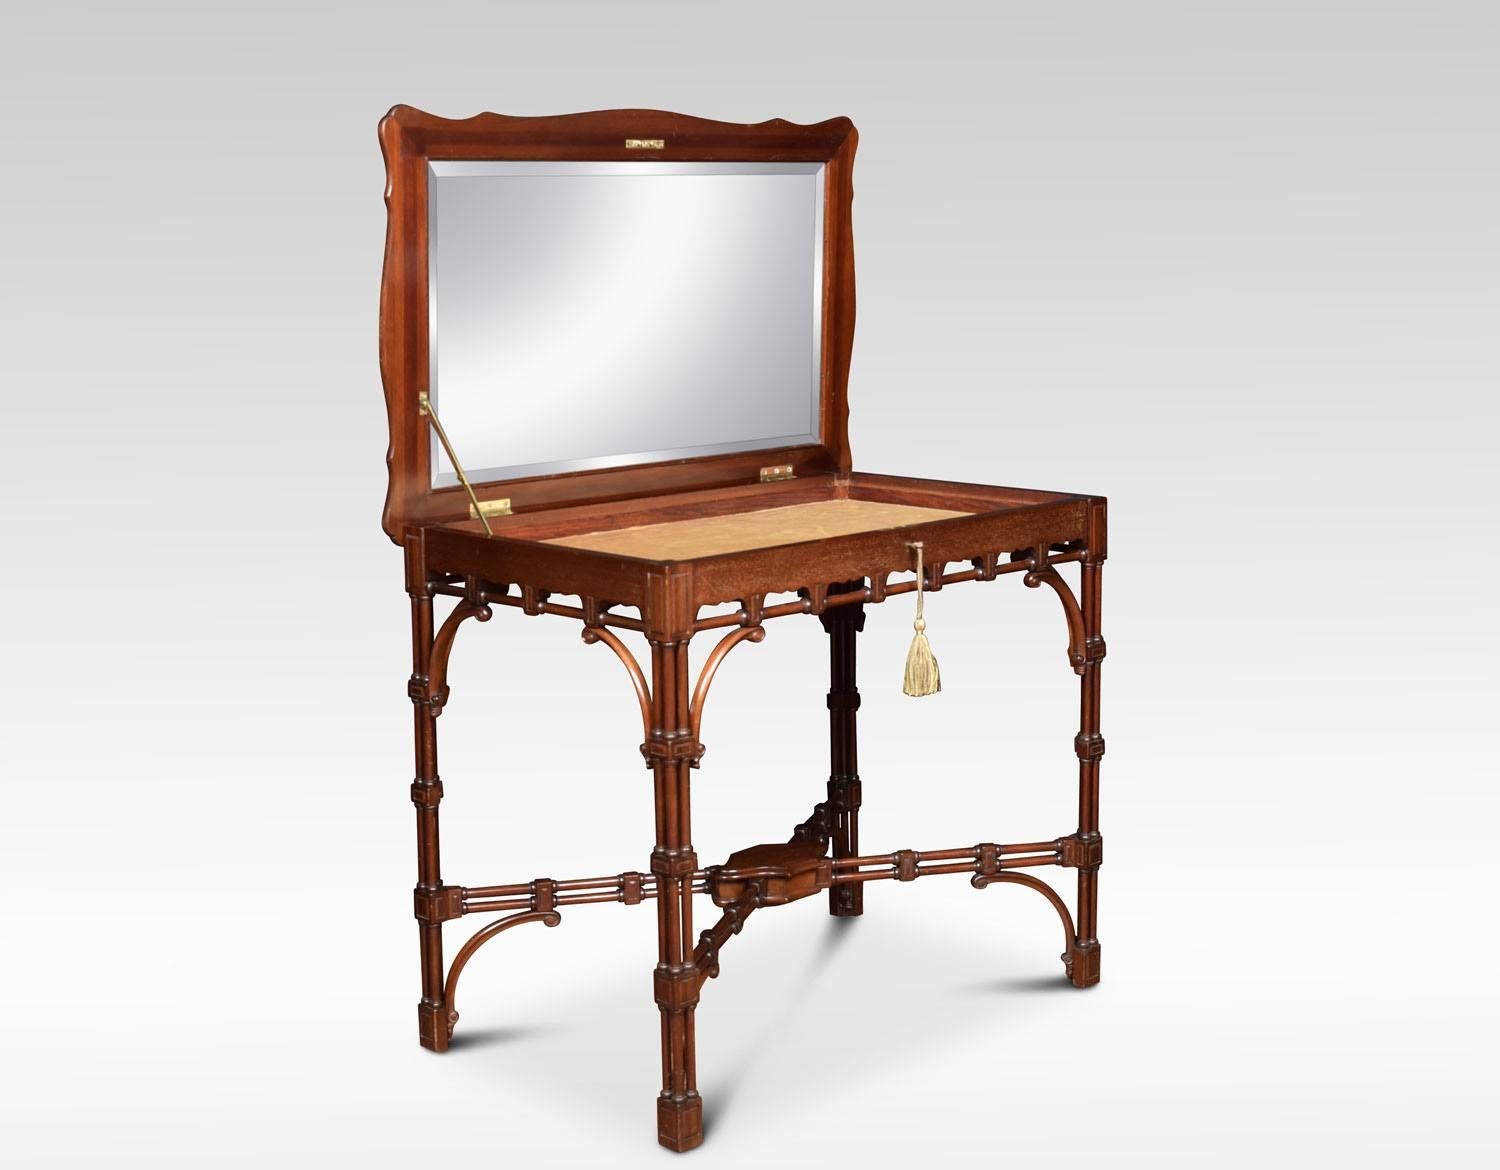 Late 19th century mahogany bijouterie table, the rectangular bevelled glass hinged lid opening reveal a shallow upholstered display area. Supported on clustered columns united by cross stretcher.
Dimensions:
Height 30 inches
Width 37